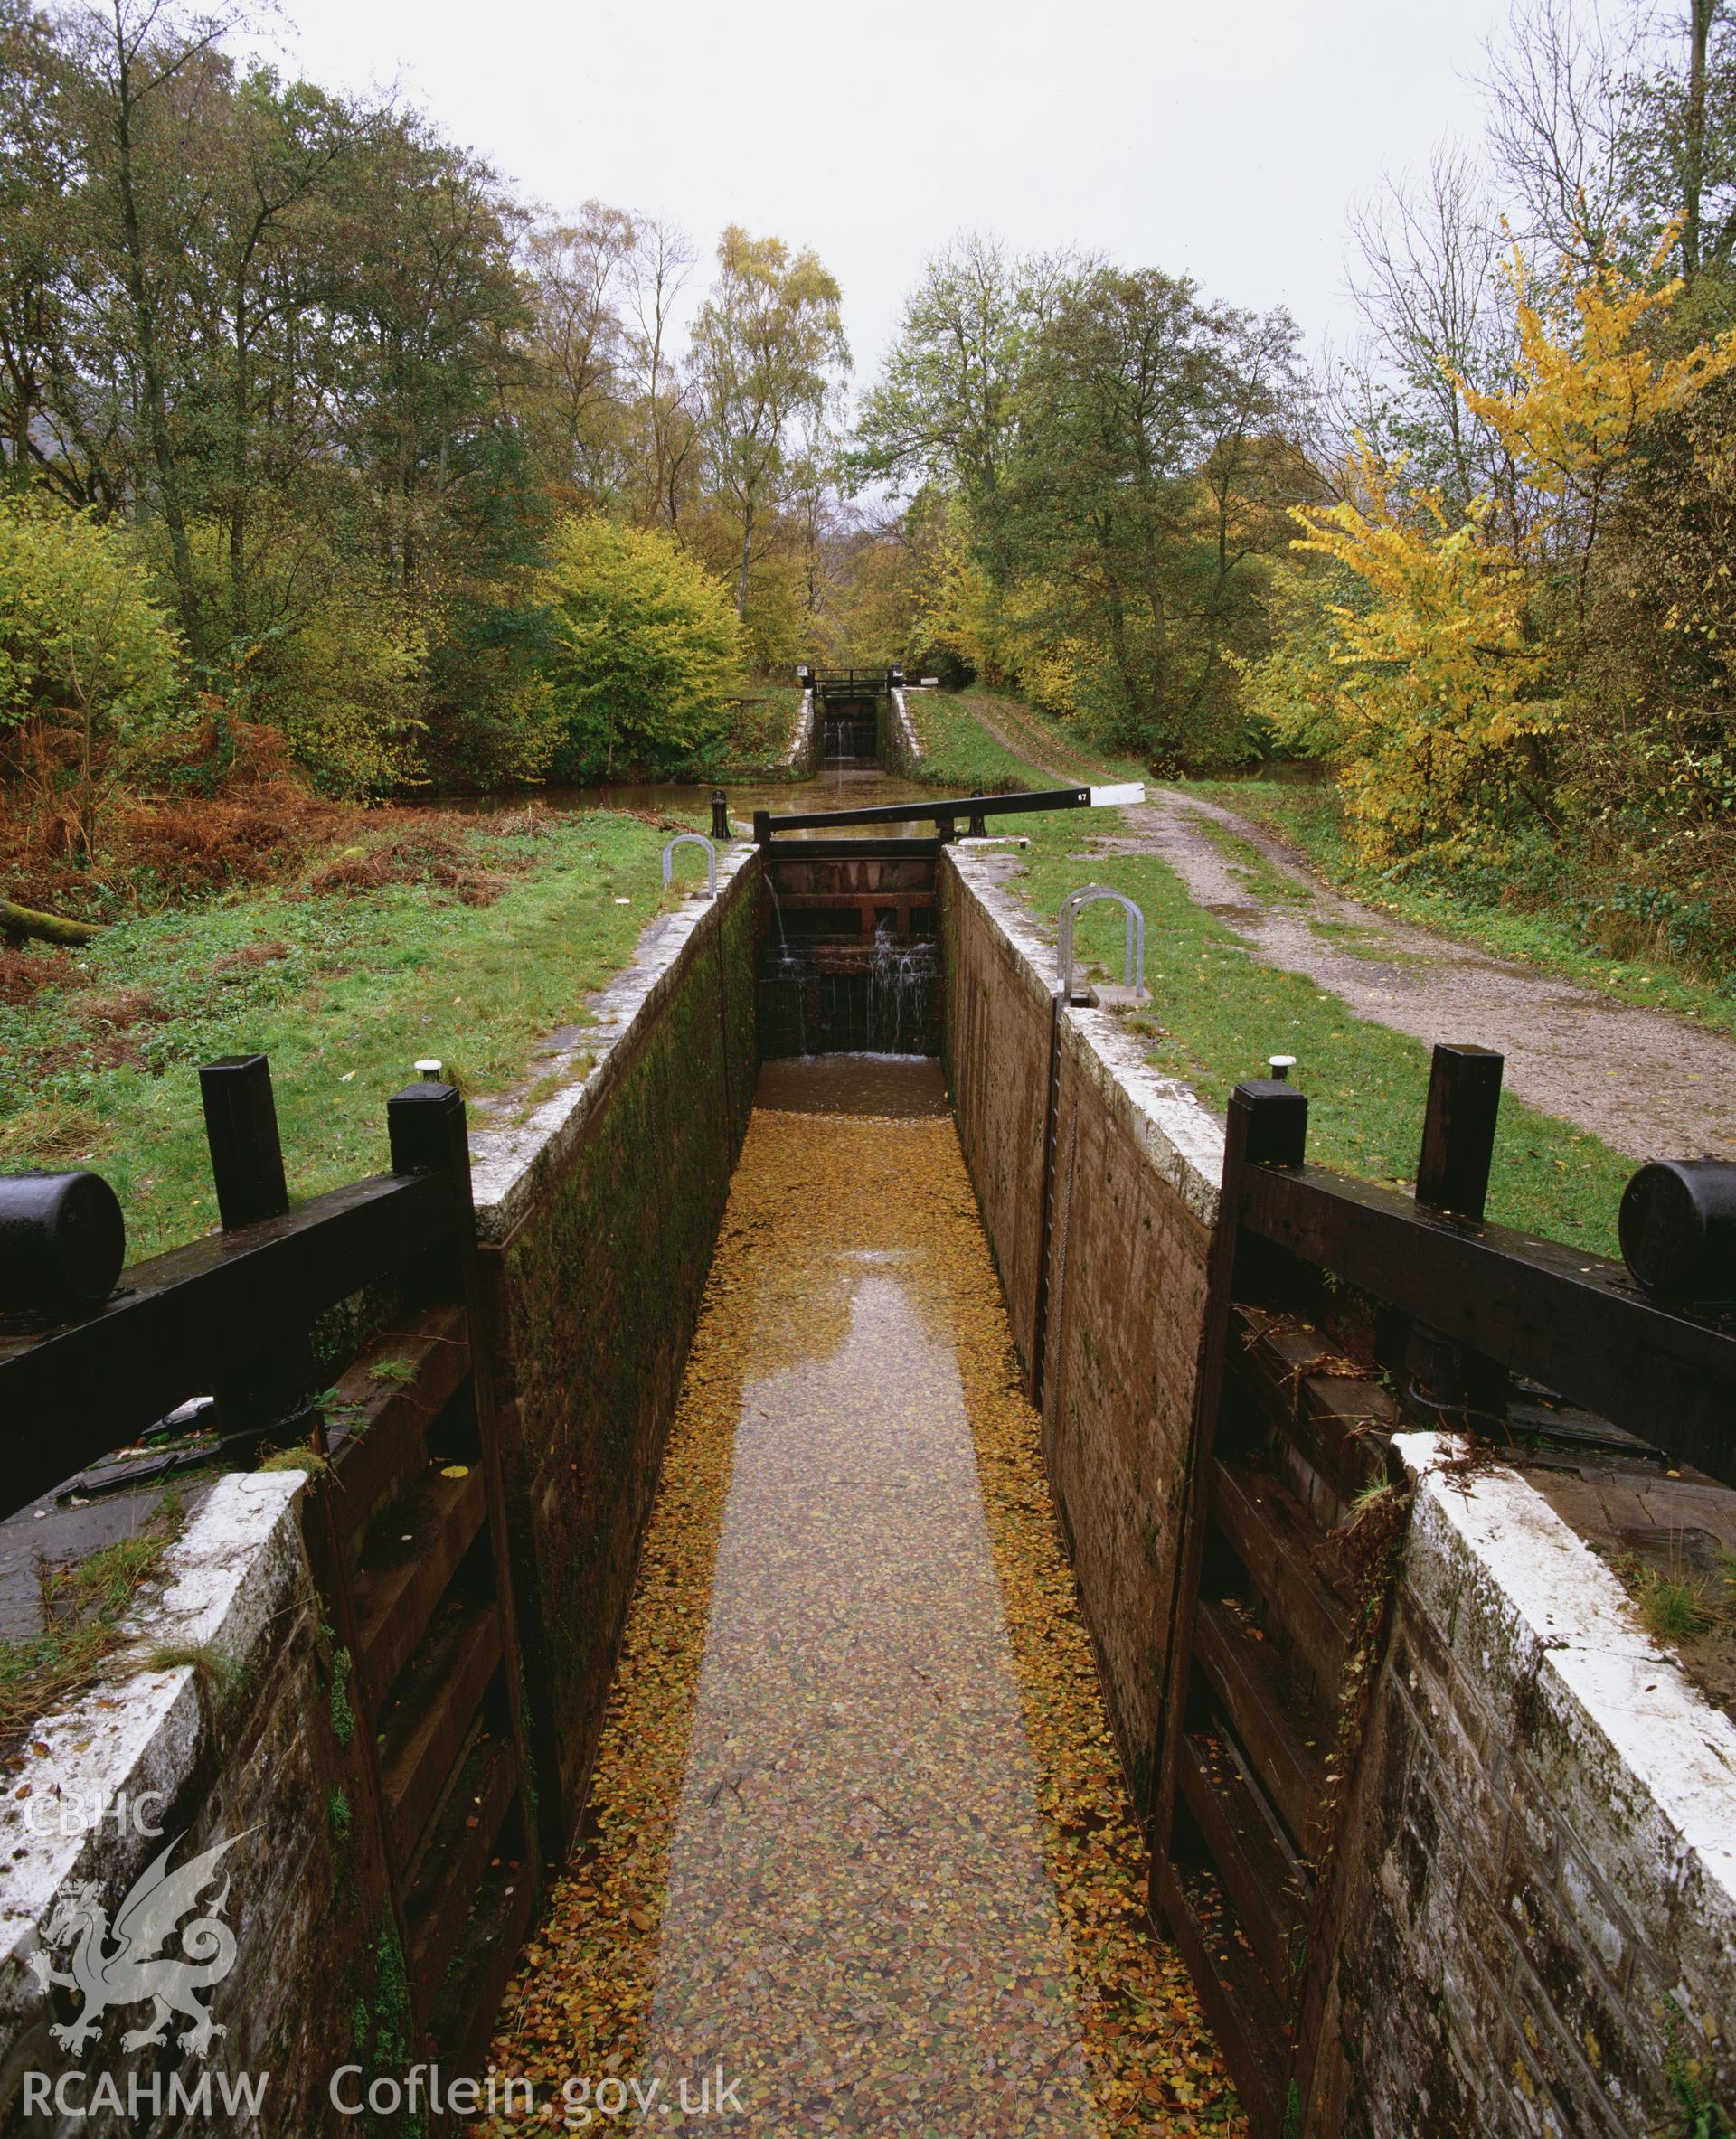 RCAHMW colour transparency showing Lock 67 at Llangynidr, taken by Iain Wright, c.1990